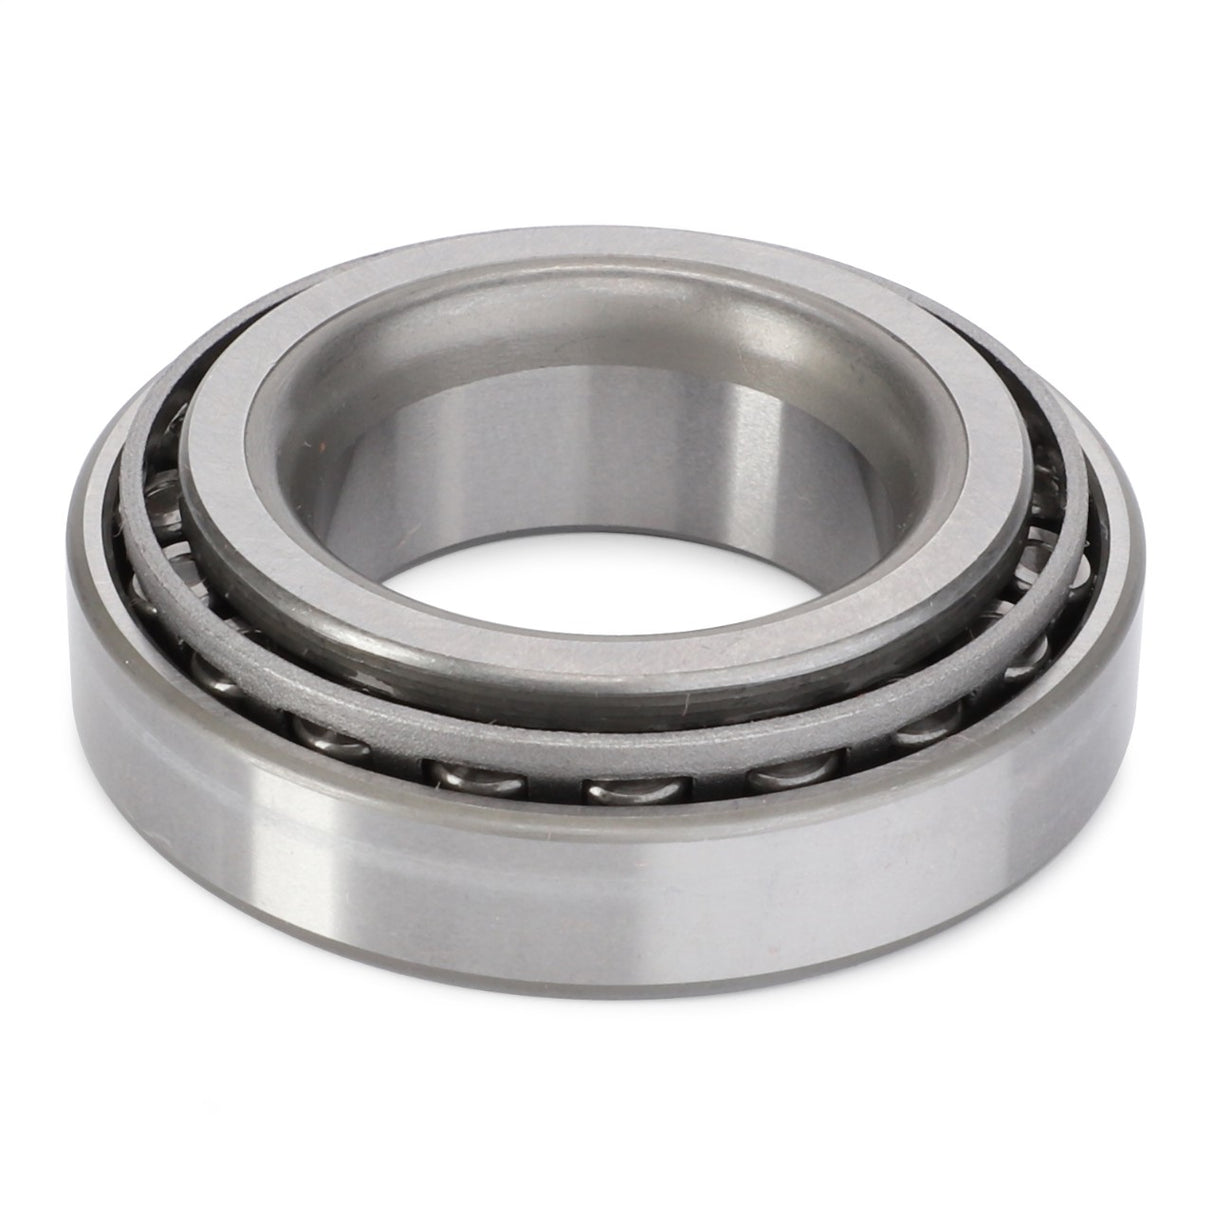 AGCO | Taper Roller Bearing - 893373M91 - Farming Parts